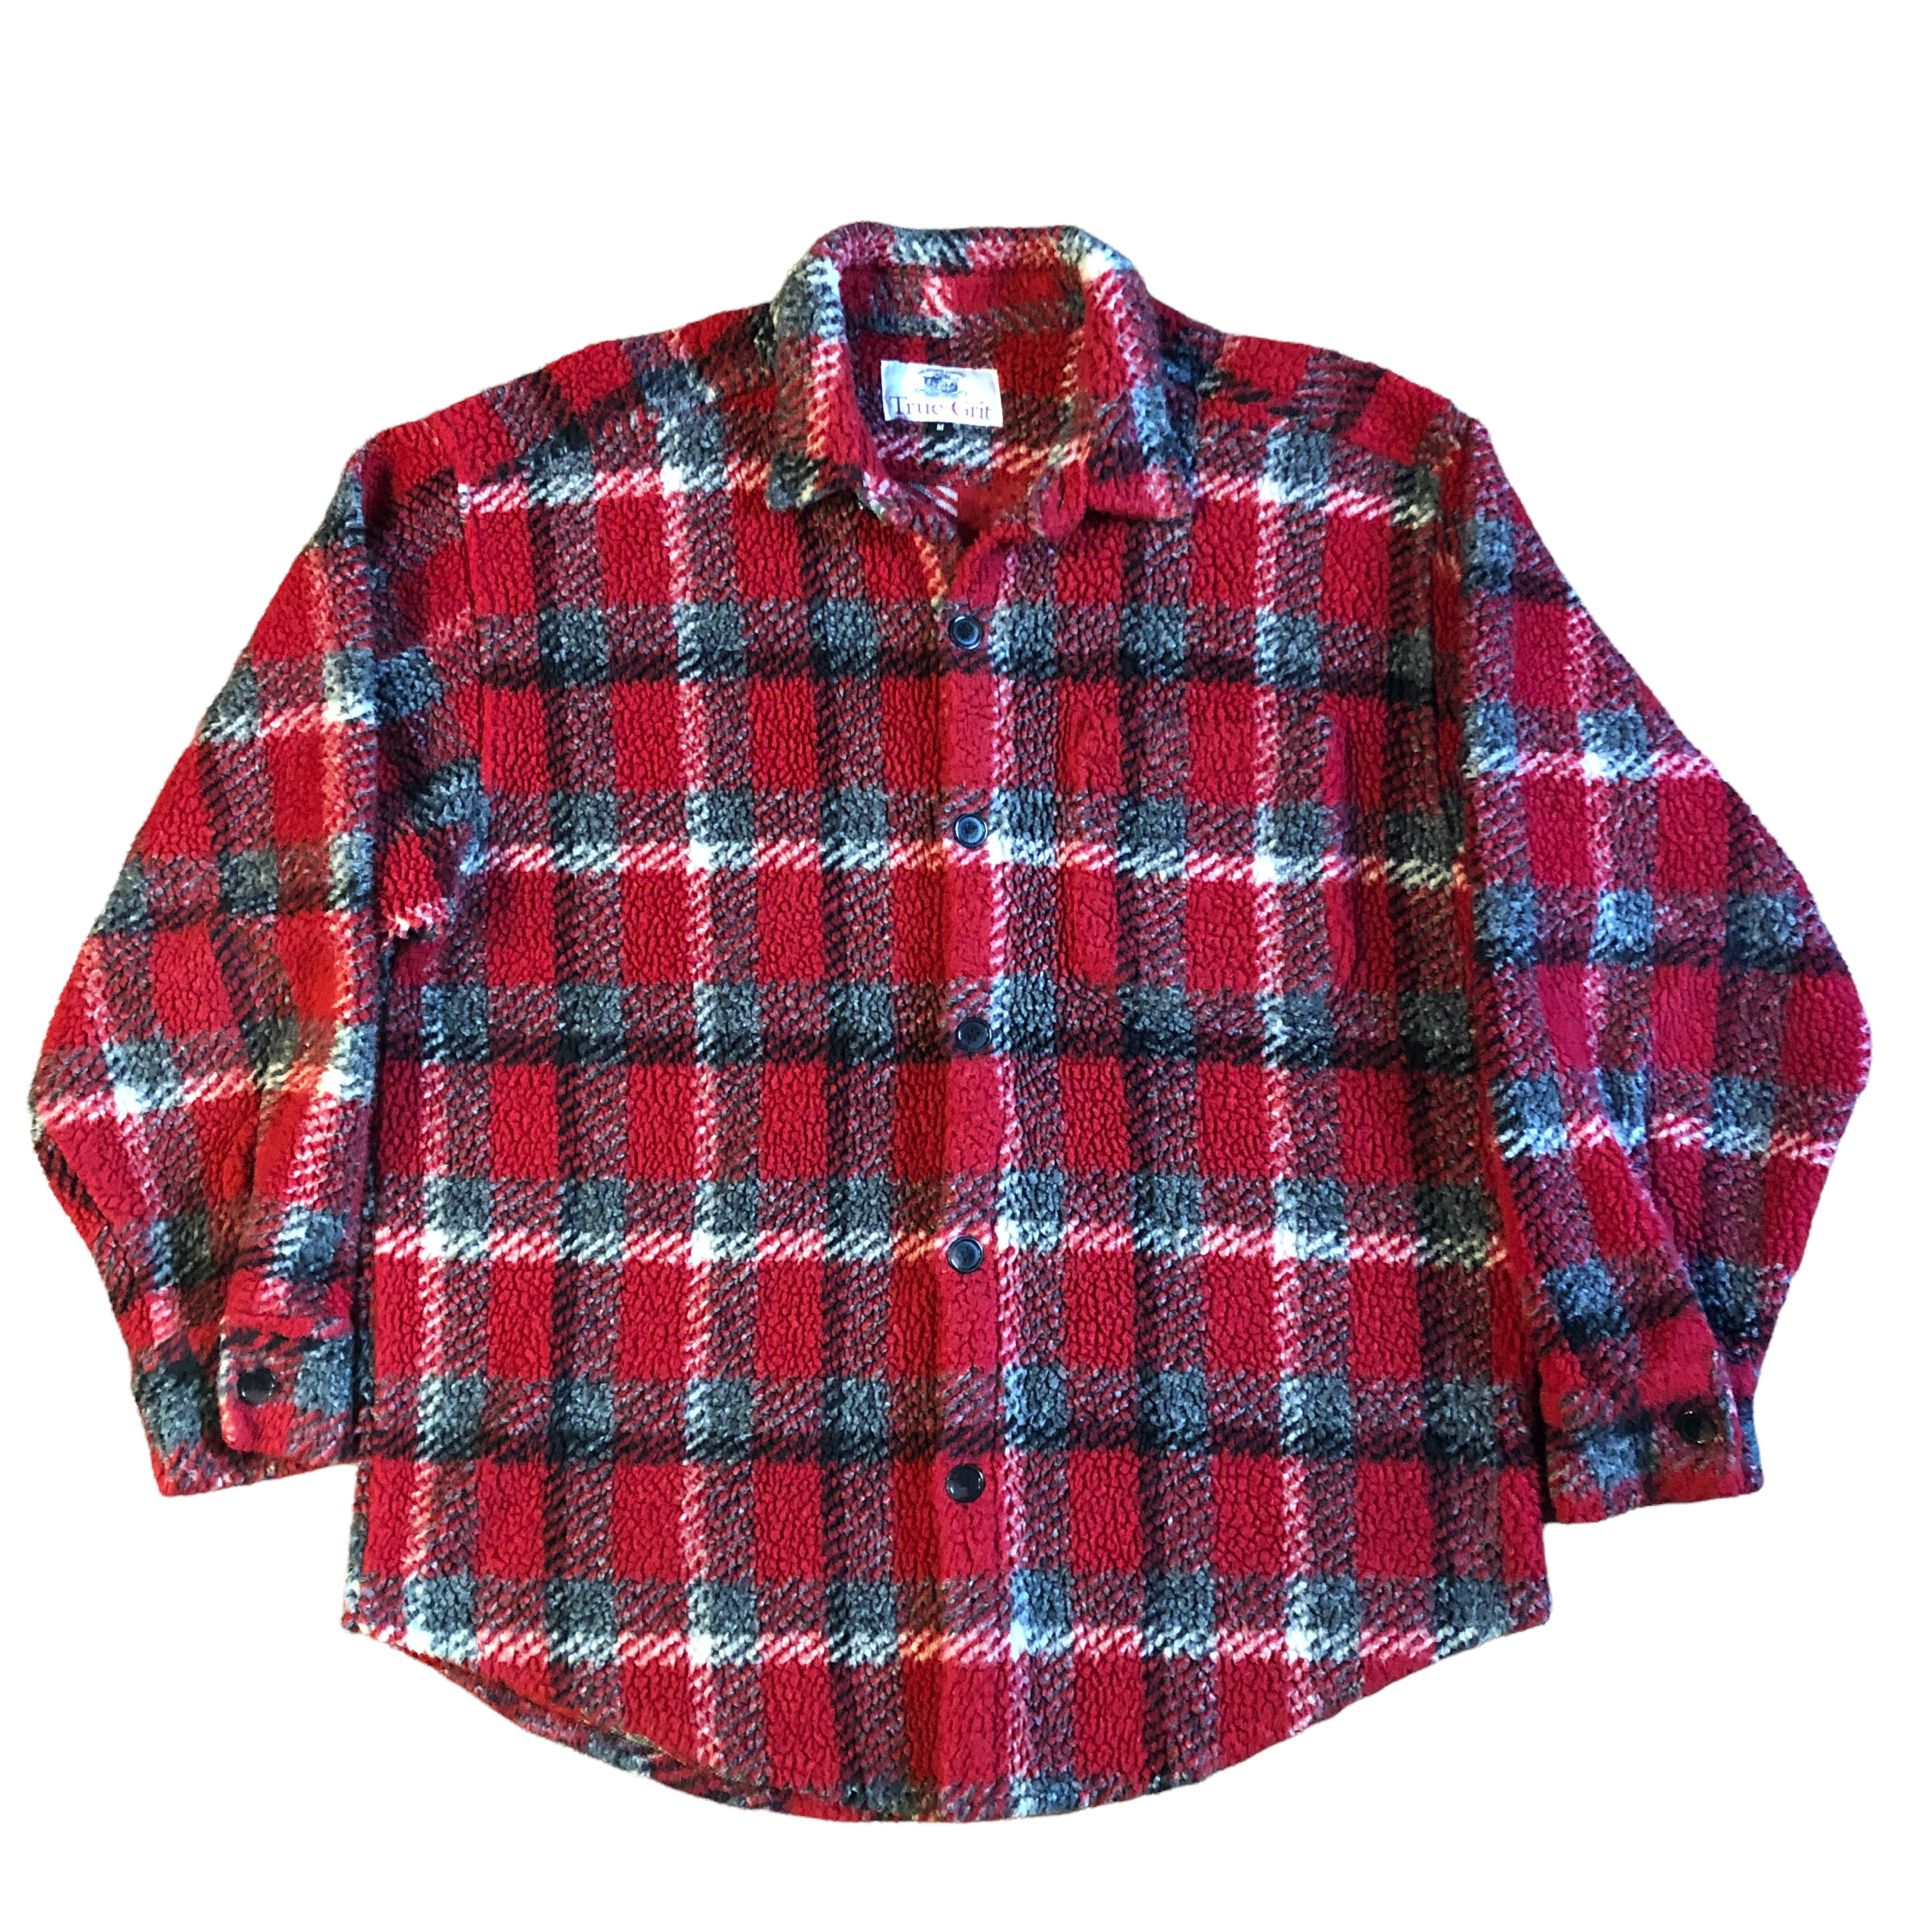 True Grit Vintage Fleece Square Plaid Big Shirt Size M Red Men’s Made in USA. 